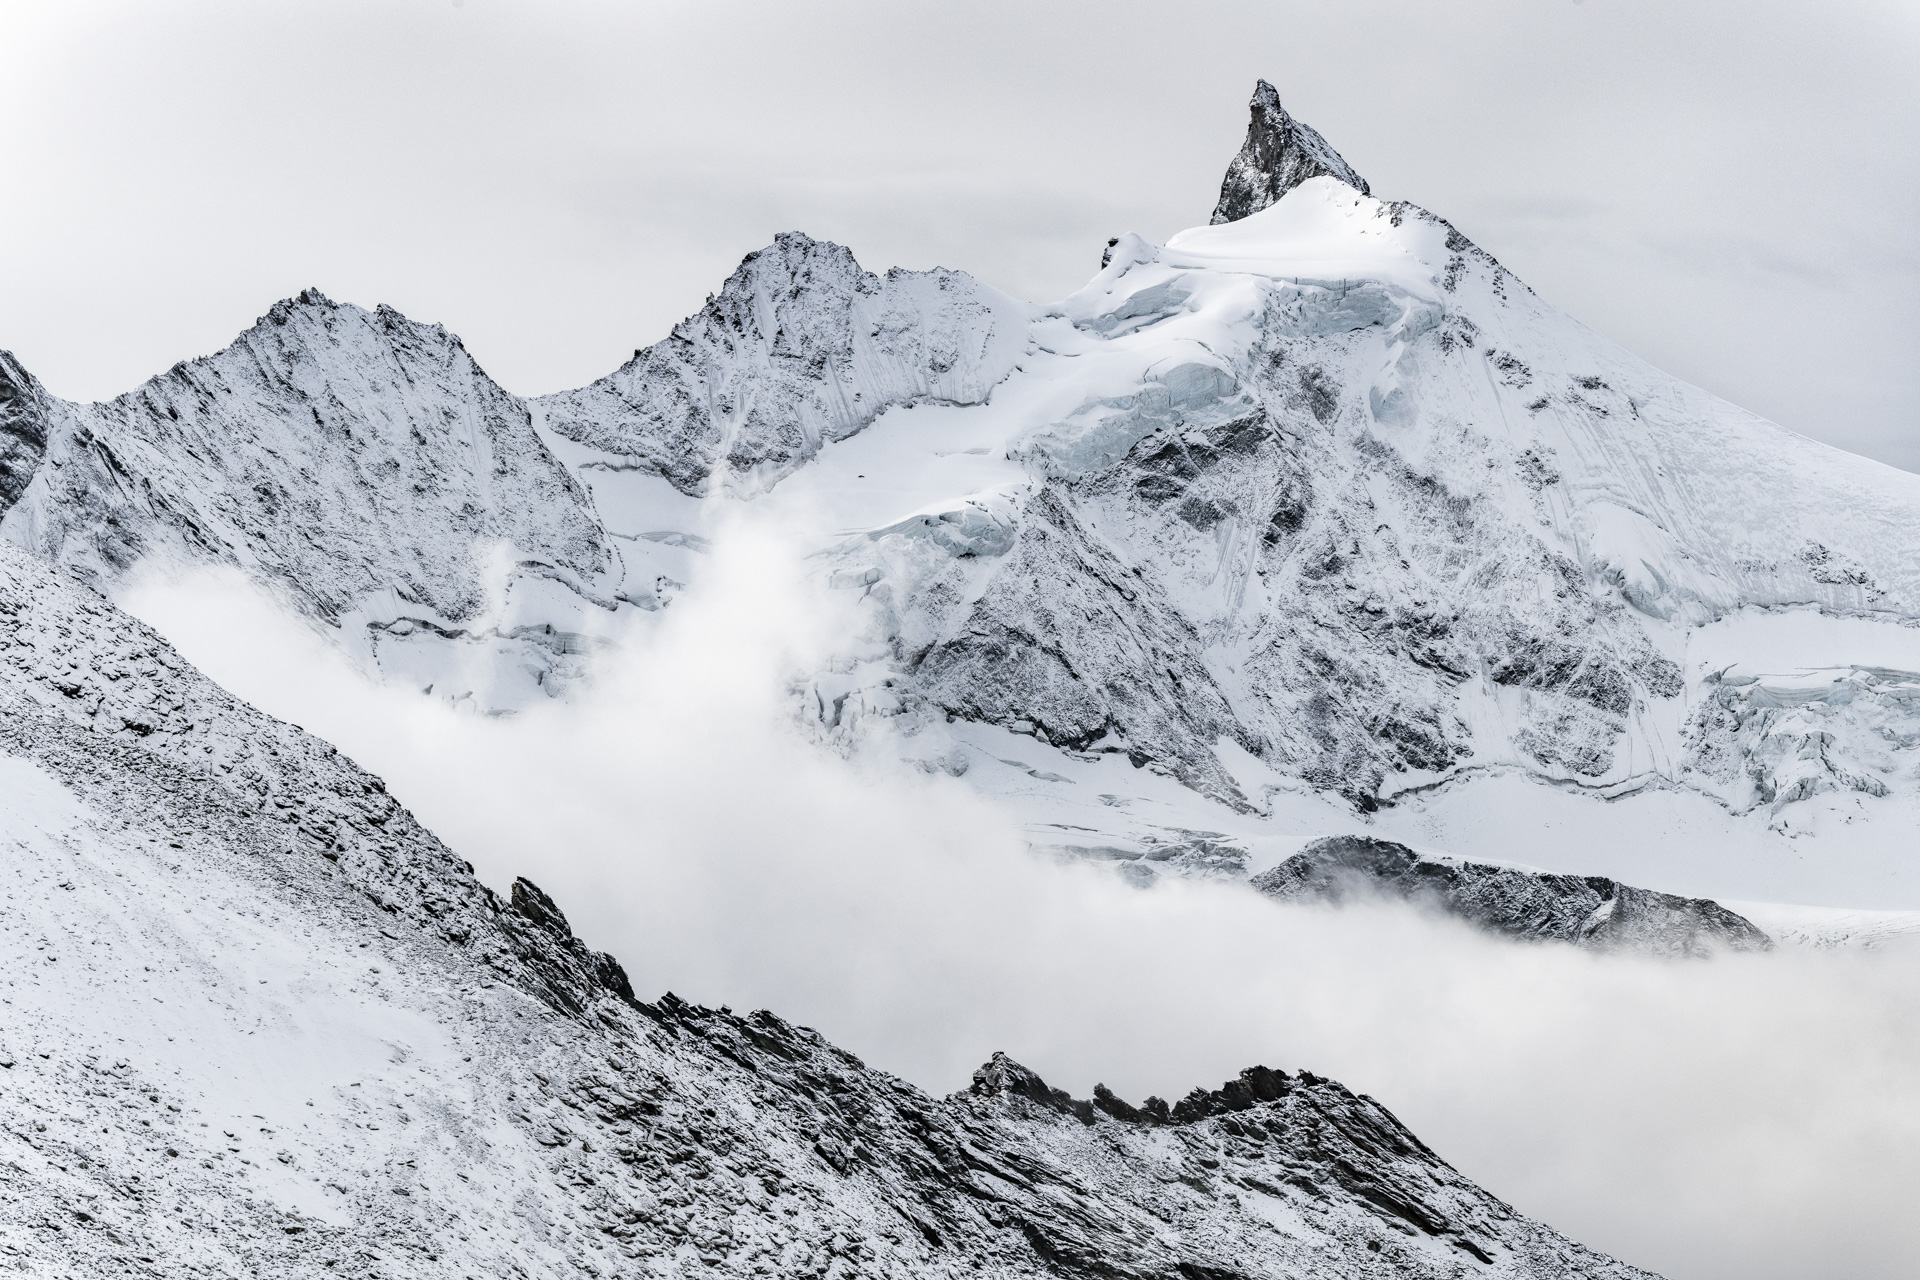 First snow on the Zinalrothorn - mountain landscape picture  created by a high alpine photographer